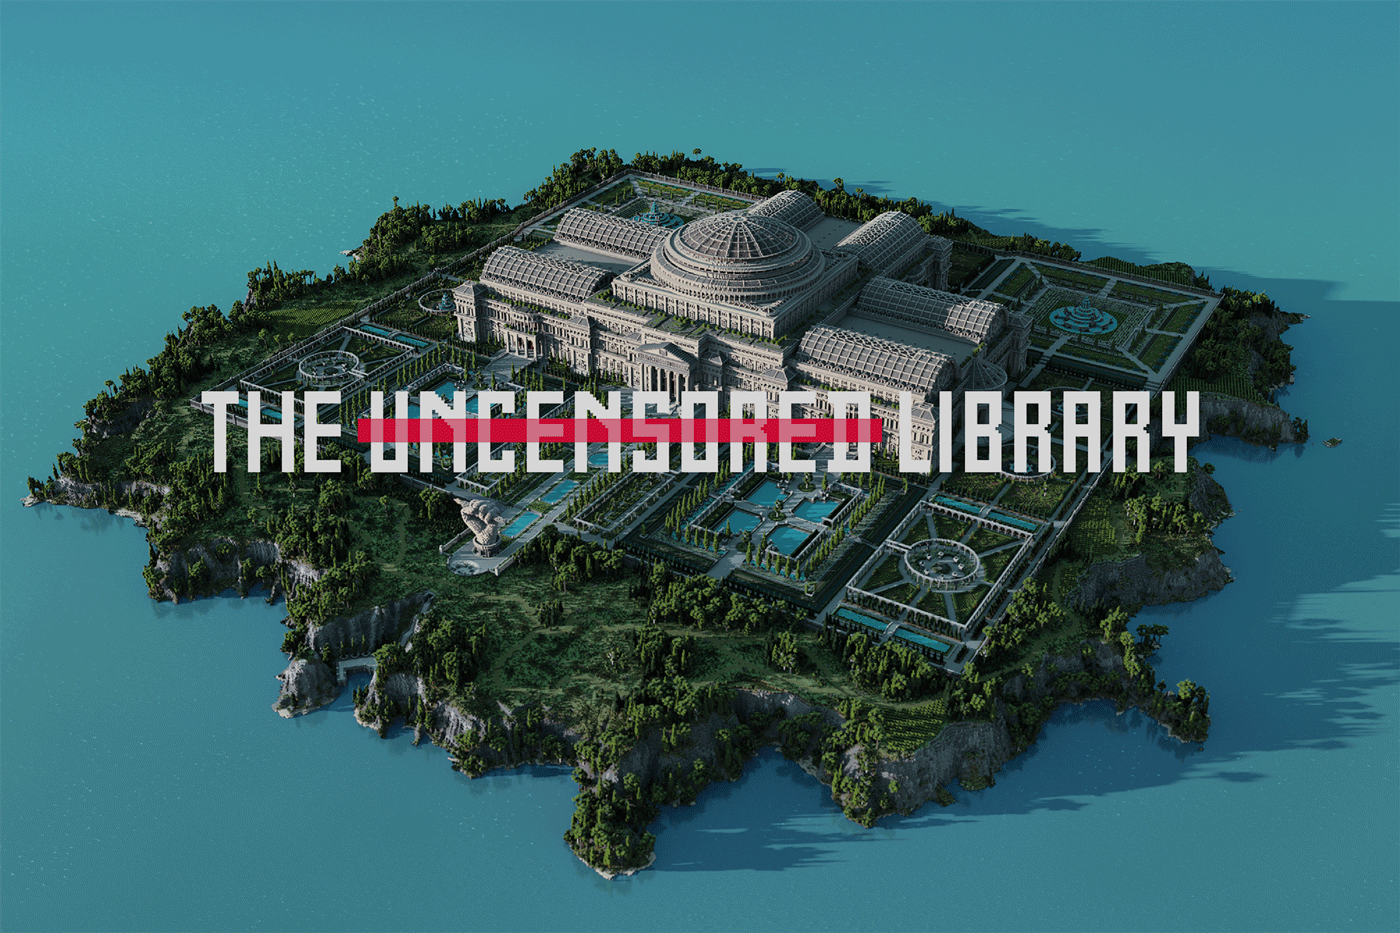 Reporters Without Borders’ Uncensored Library Uses Minecraft To Provide Access to Censored Work